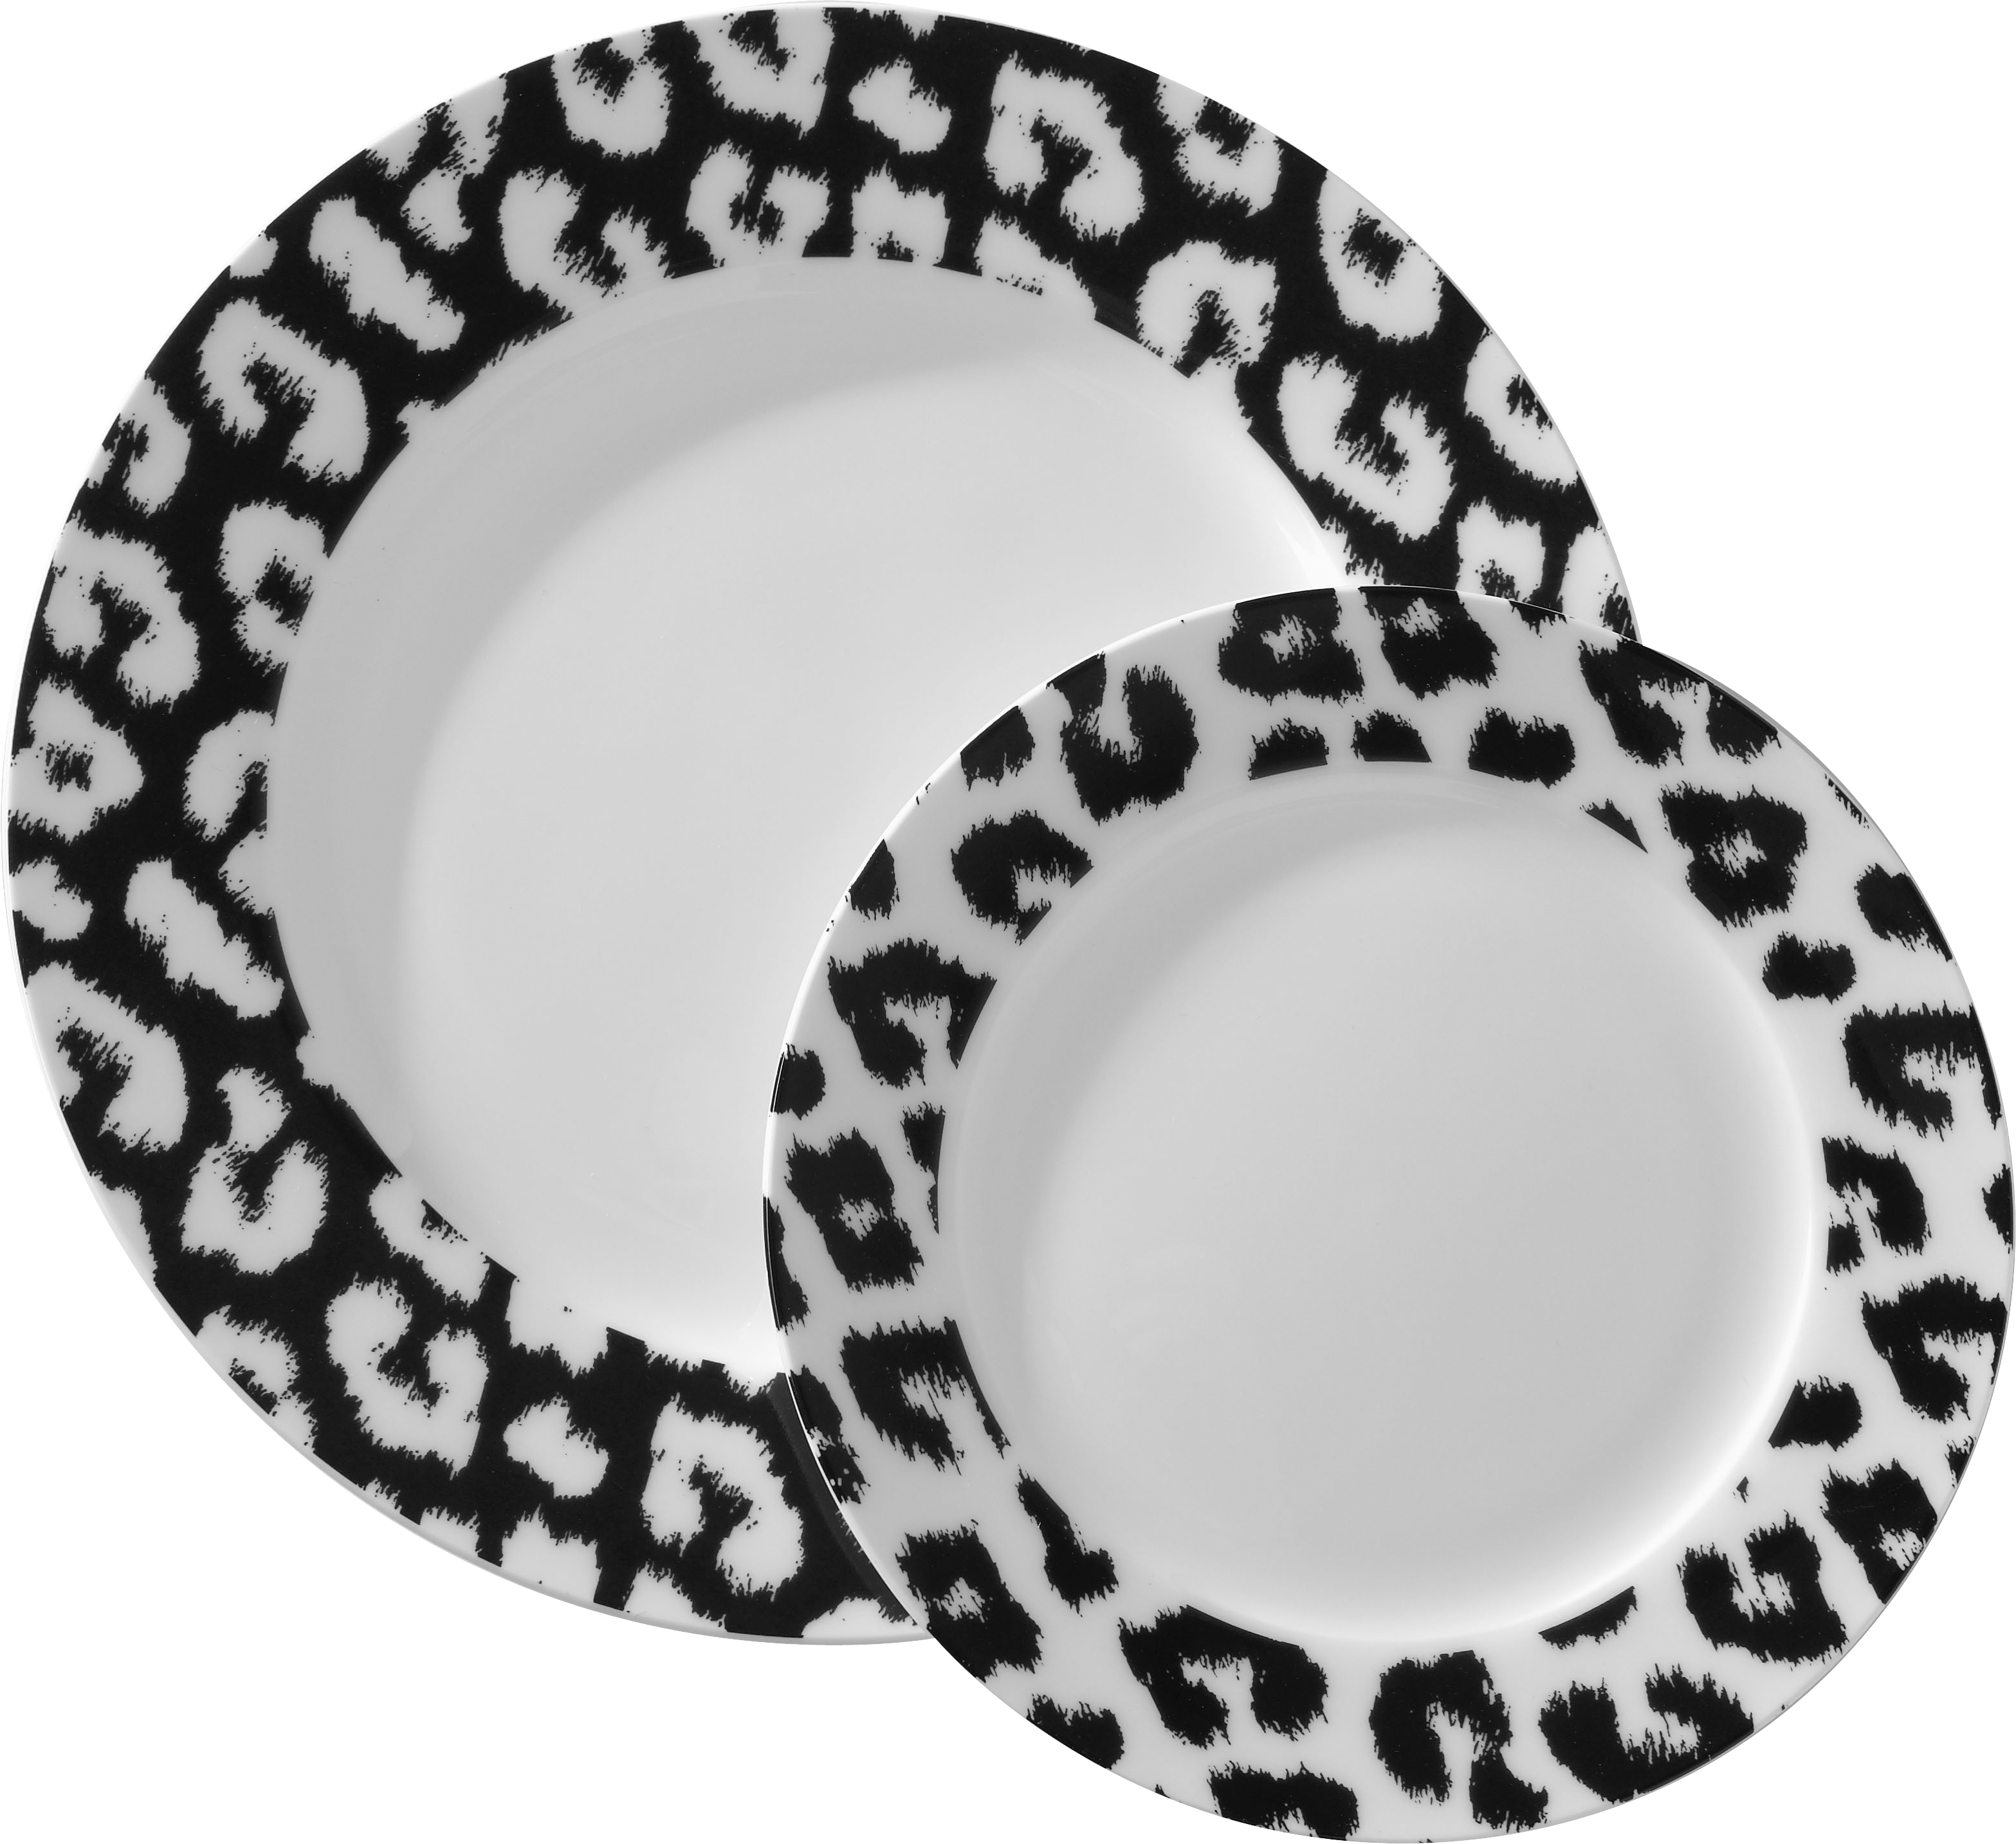 Plates PNG image